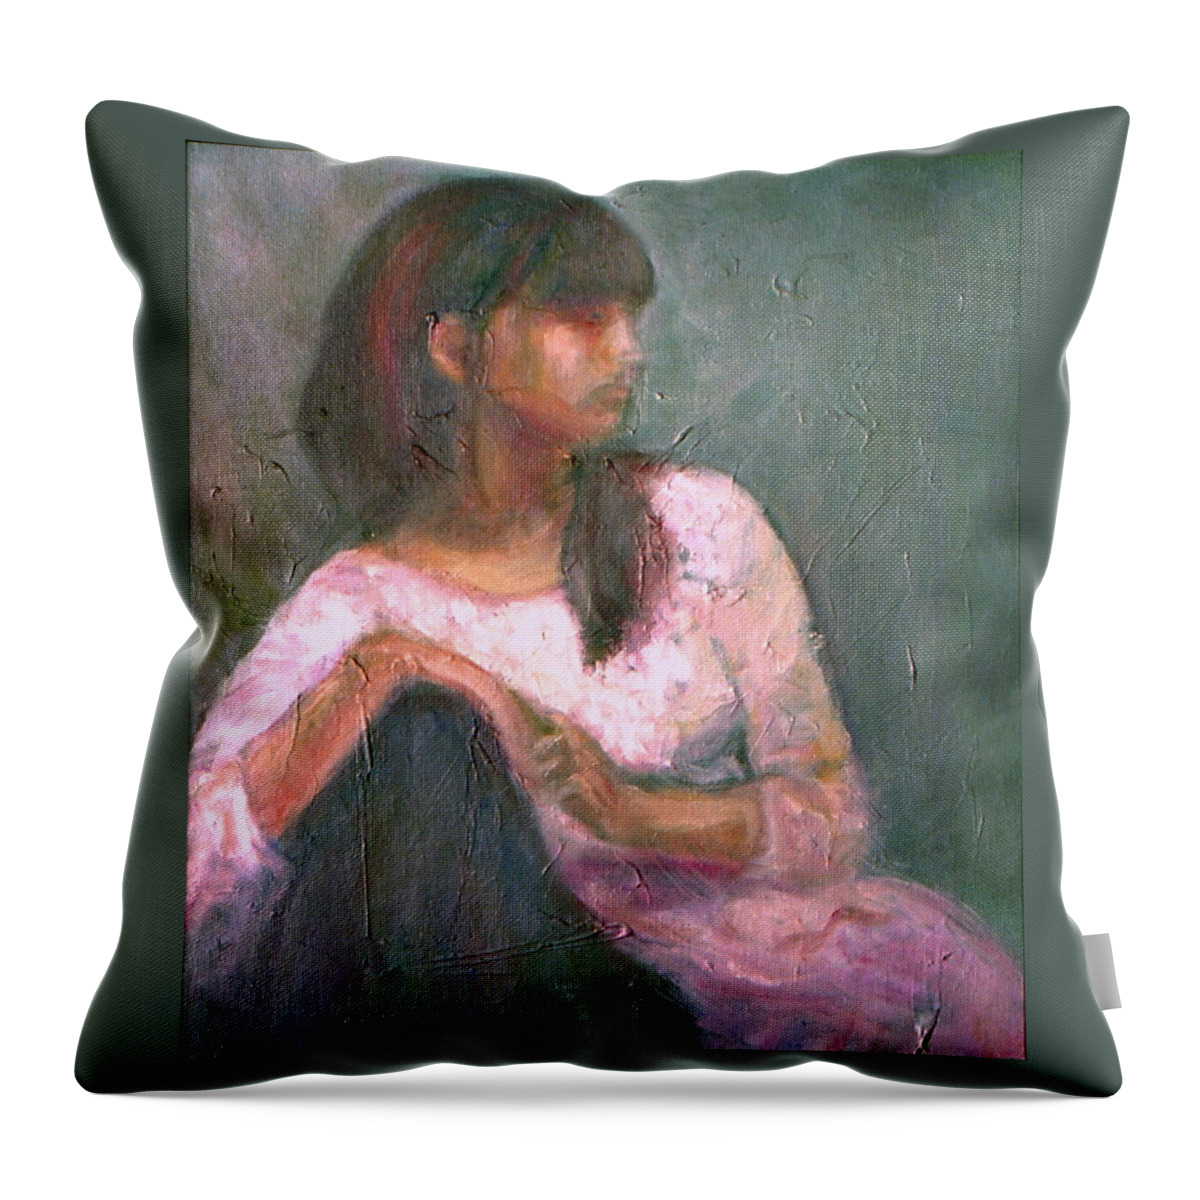 Portrait Throw Pillow featuring the painting New Year's Blossom - Sale - Textural Original Oil on Canvas Portrait by Quin Sweetman